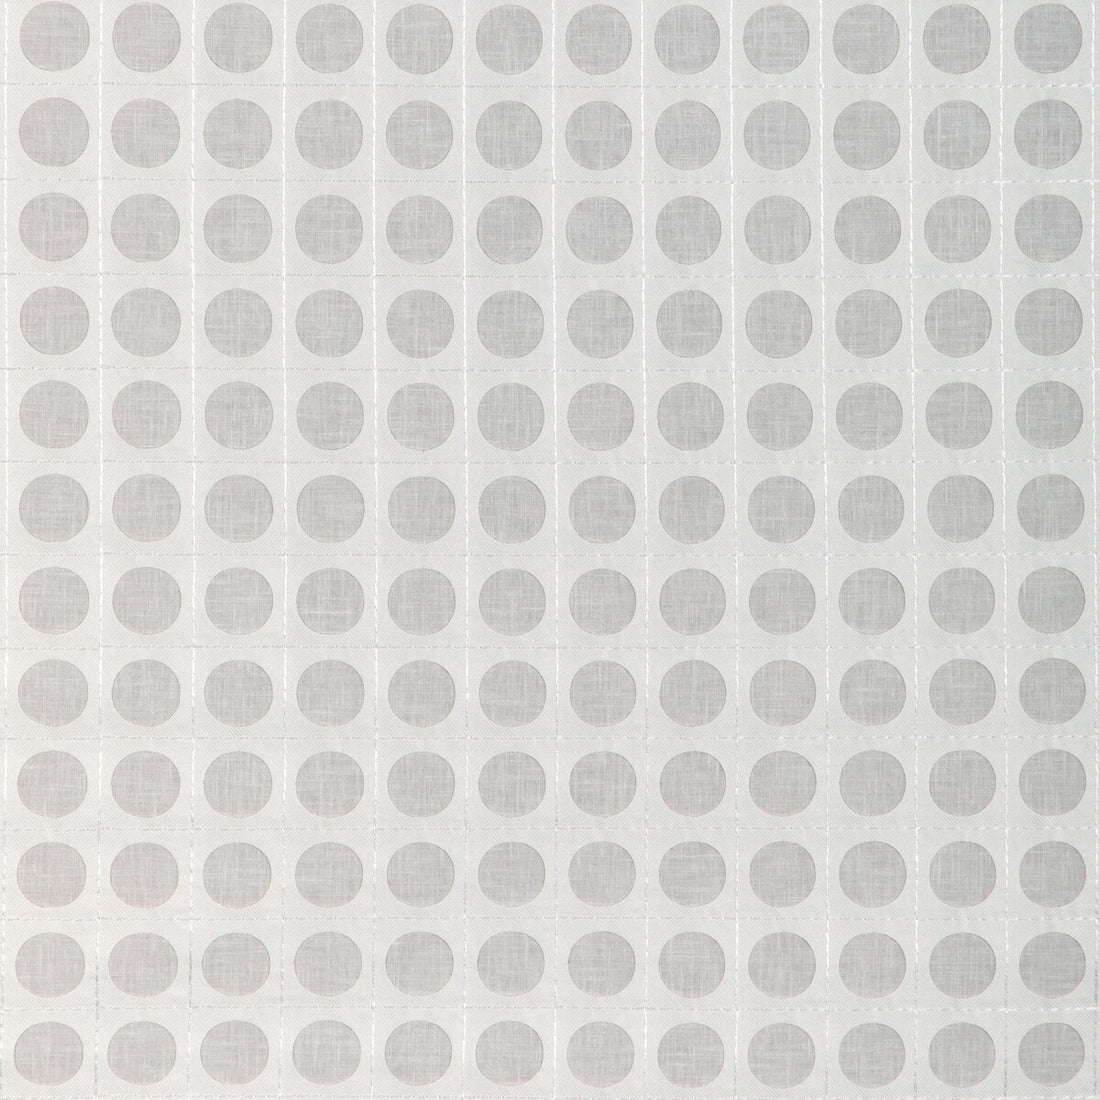 Lunar Dot fabric in grey color - pattern 90008.11.0 - by Kravet Basics in the Mid-Century Modern collection